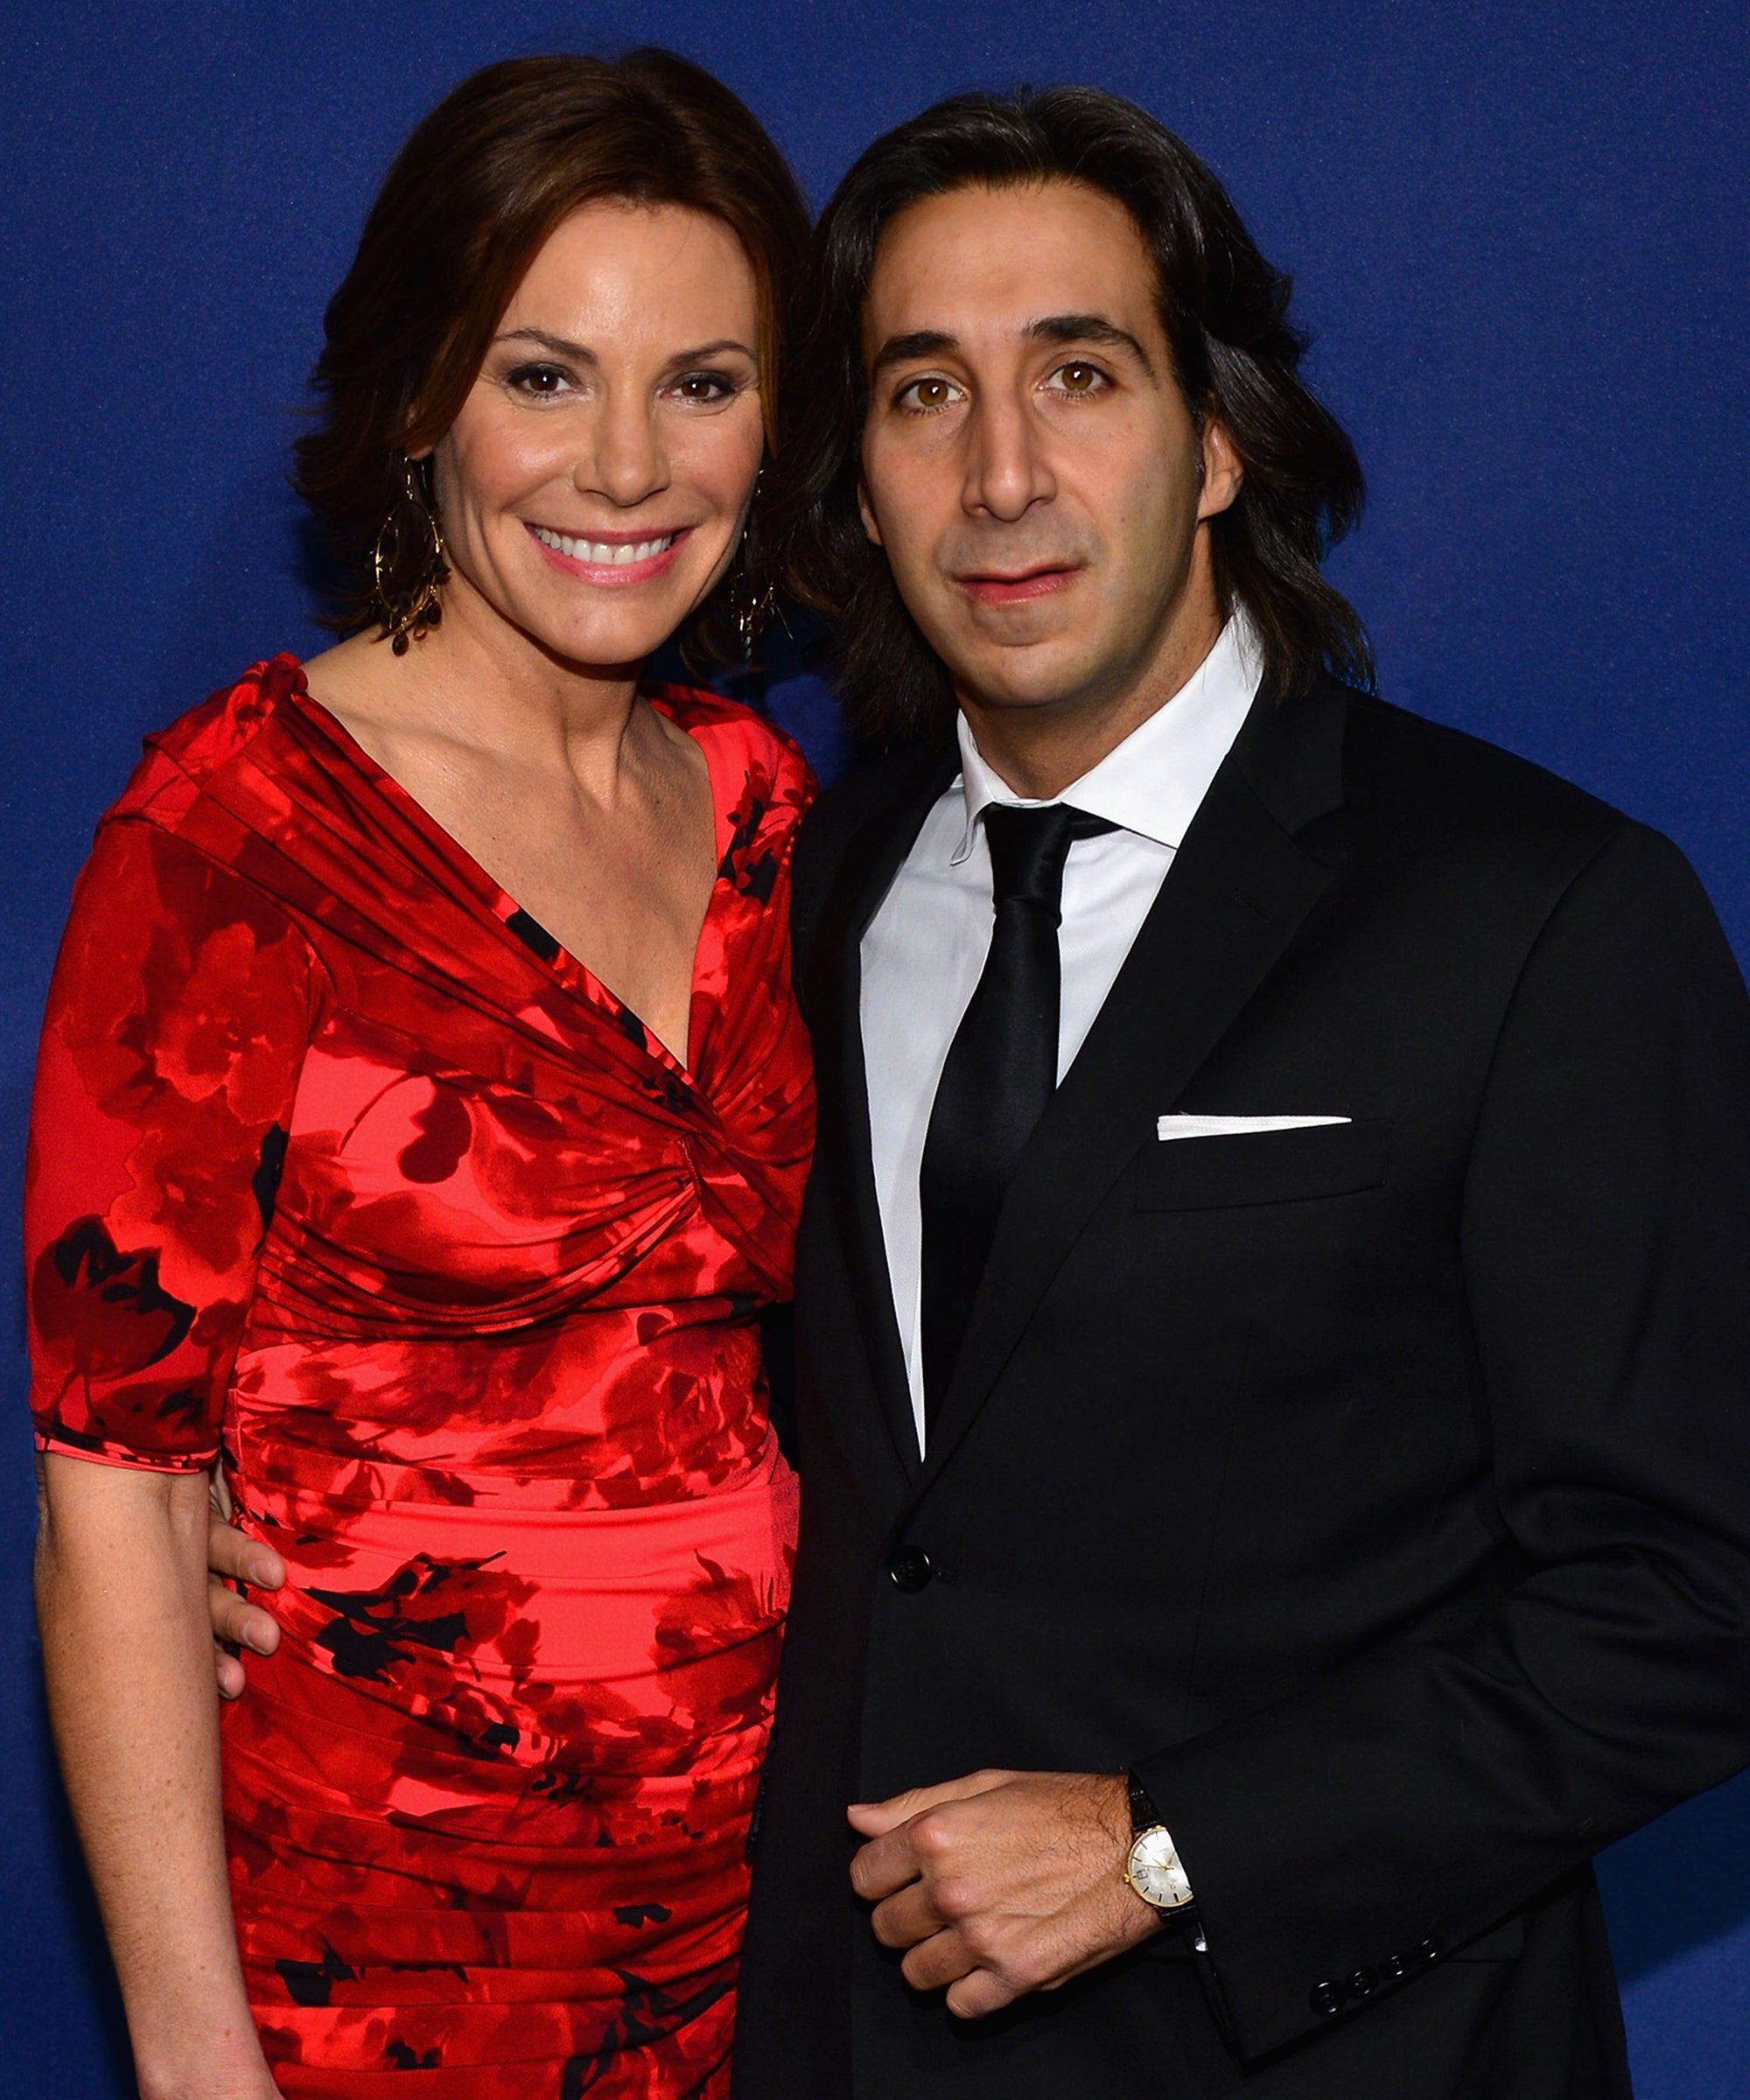 When Did Luann And Jacques Break Up On Real Housewives? picture